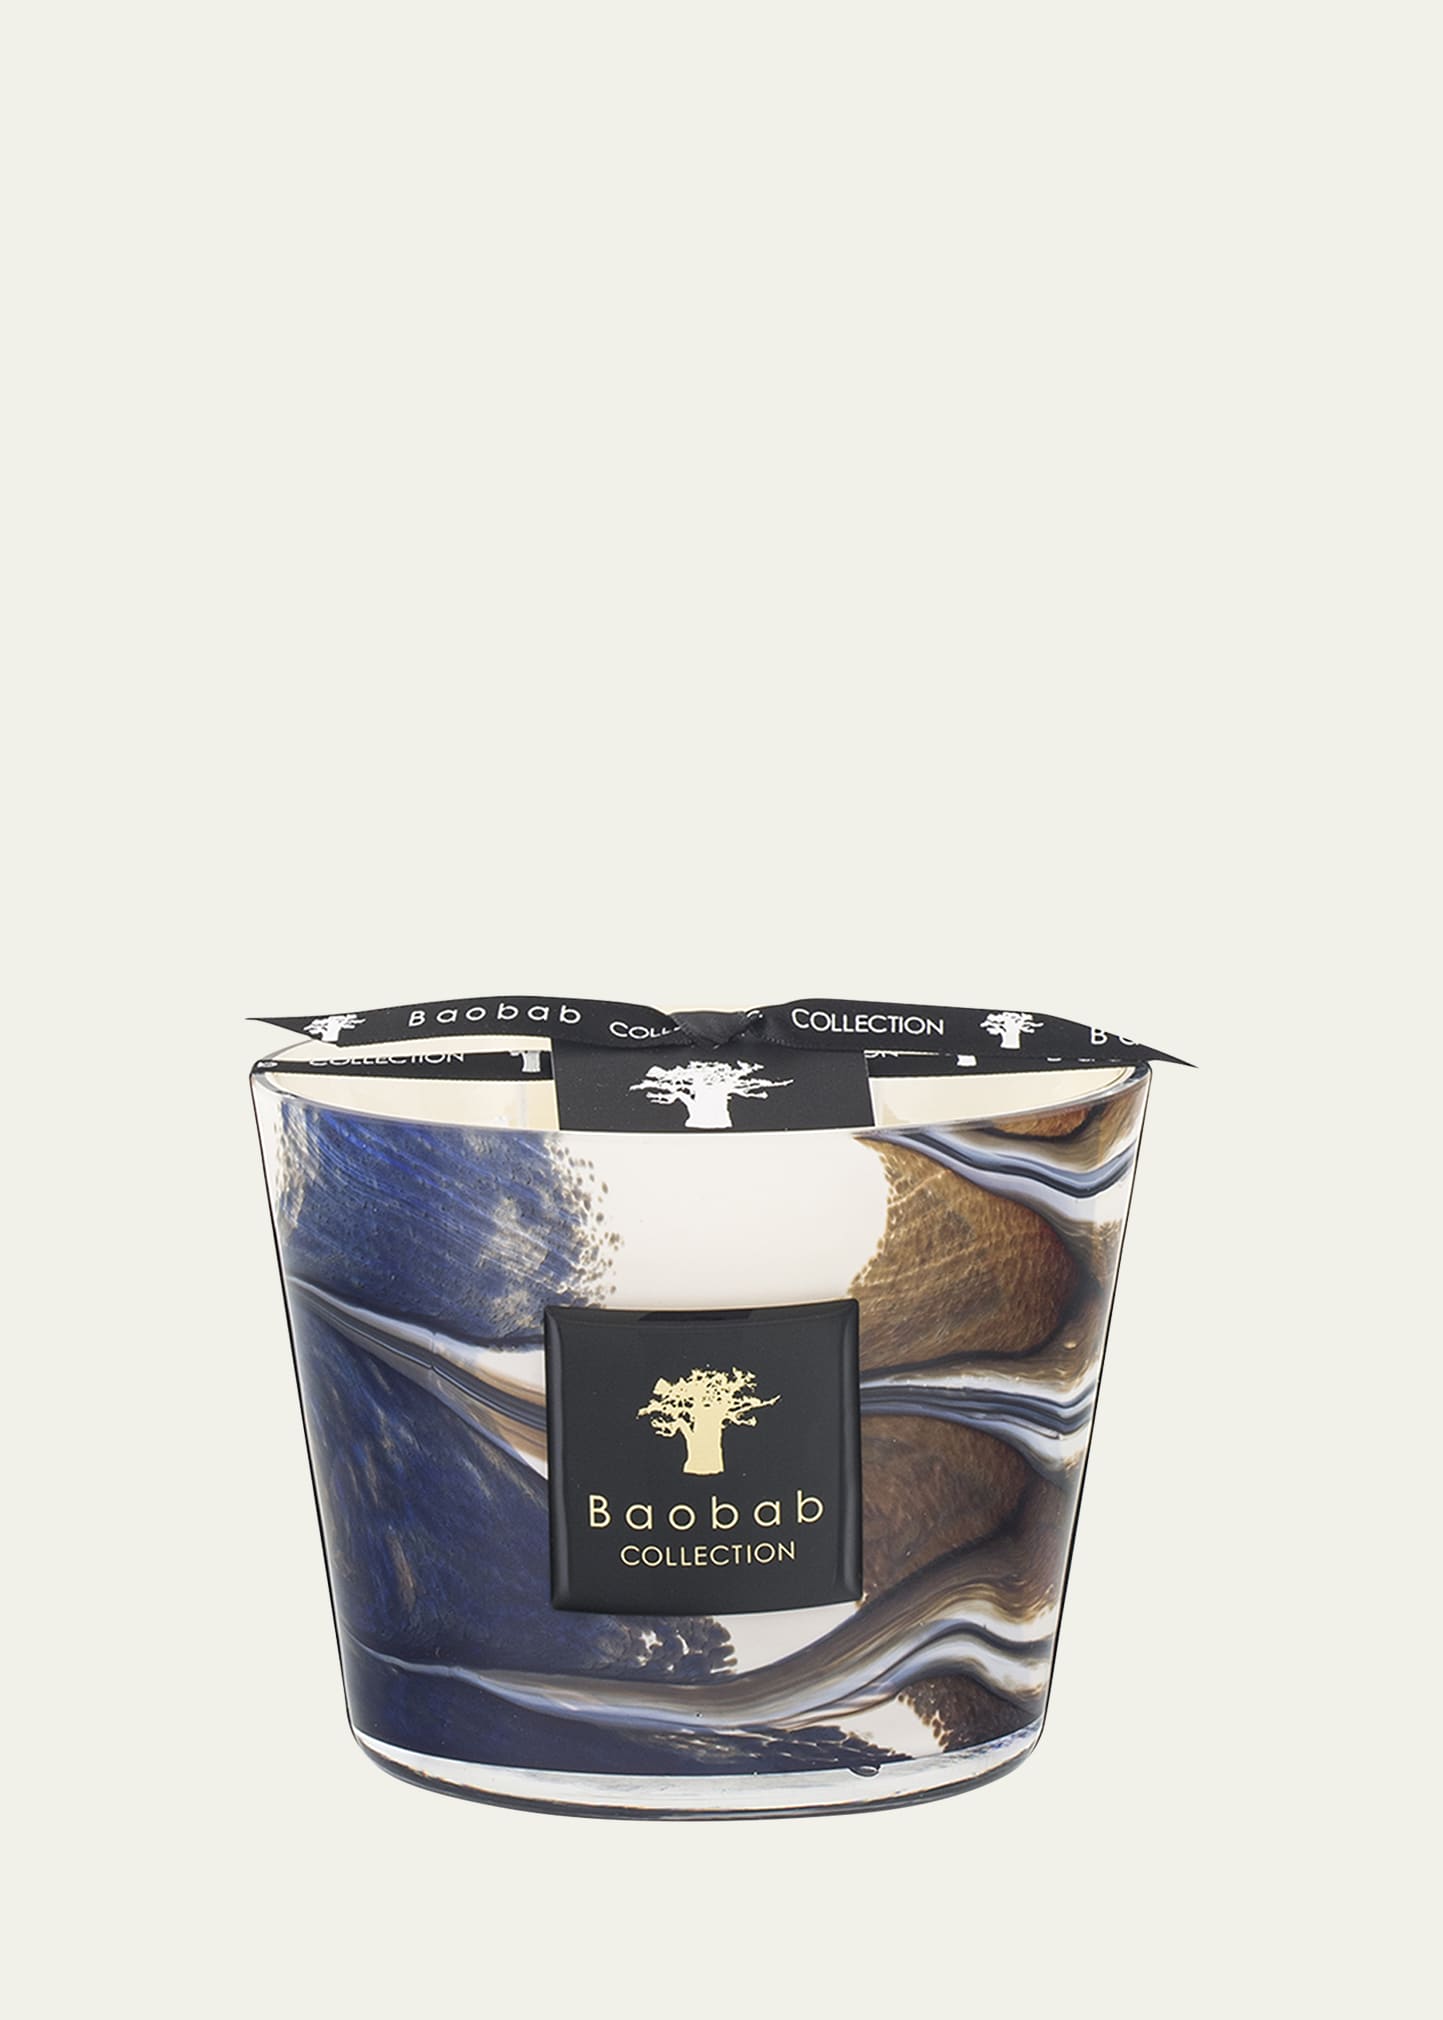 Baobab Collection Delta Nil 4-Wick Max10 Candle, 47.6 oz.